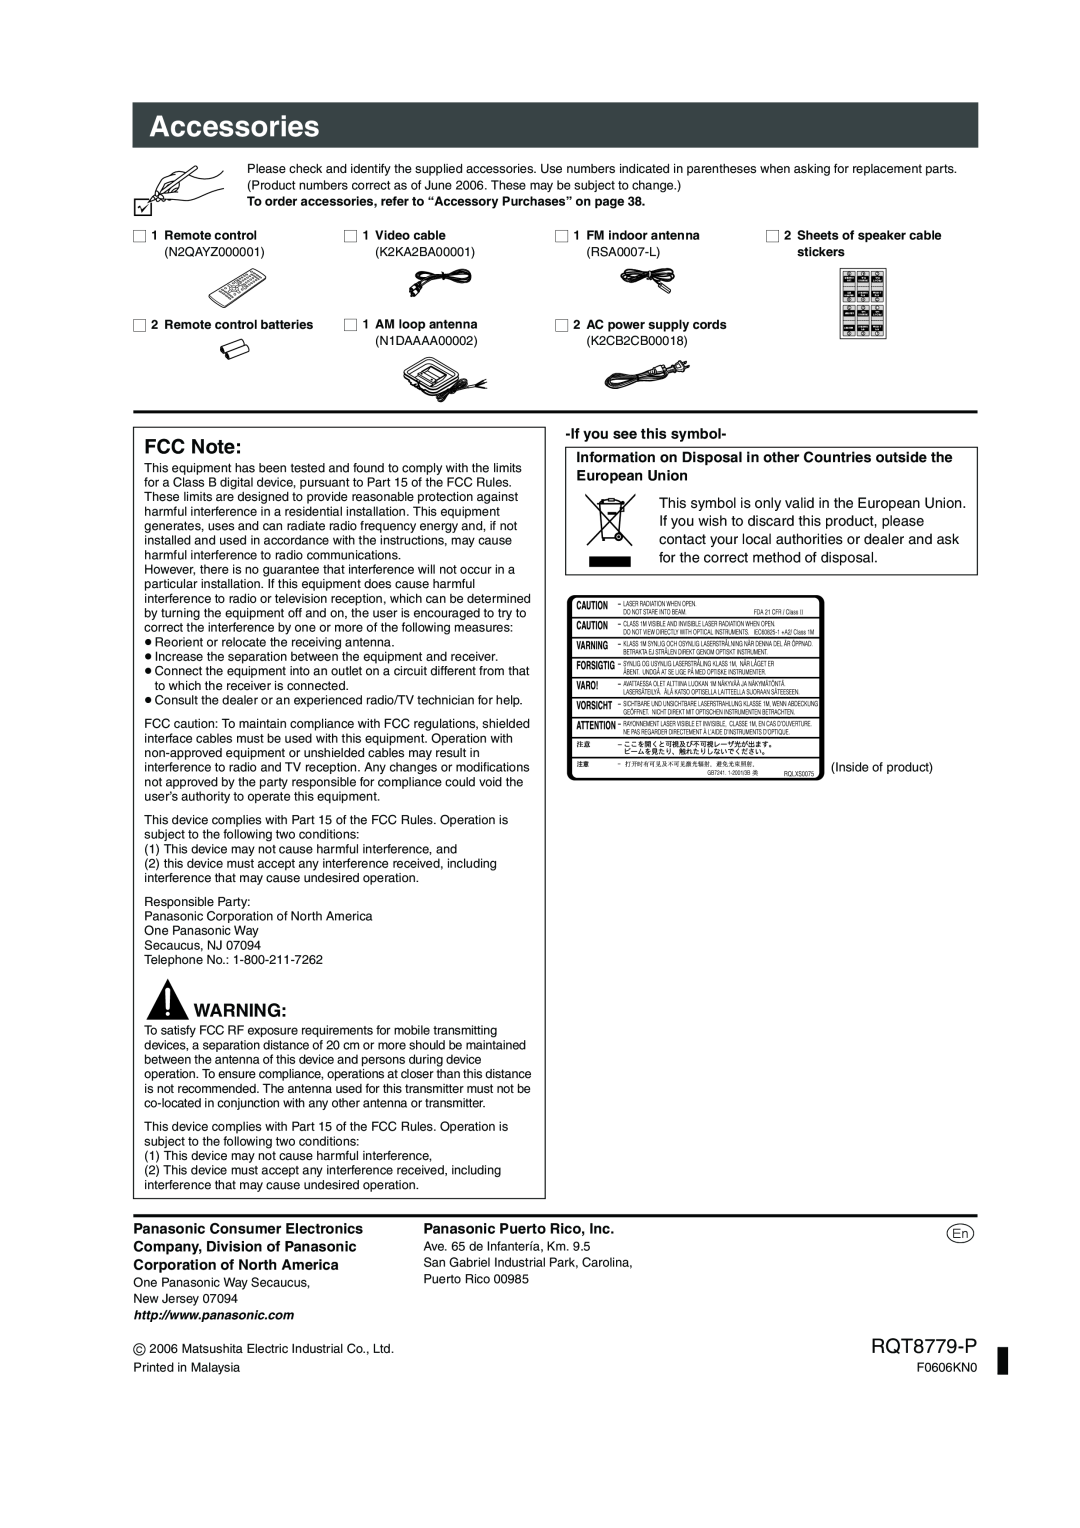 Panasonic SC-HT441W Accessor es, FCC Note, HT441WEn.bookPage40Friday,June9,20065 43PM, RQT8779-P, Ifyou see this symbol 